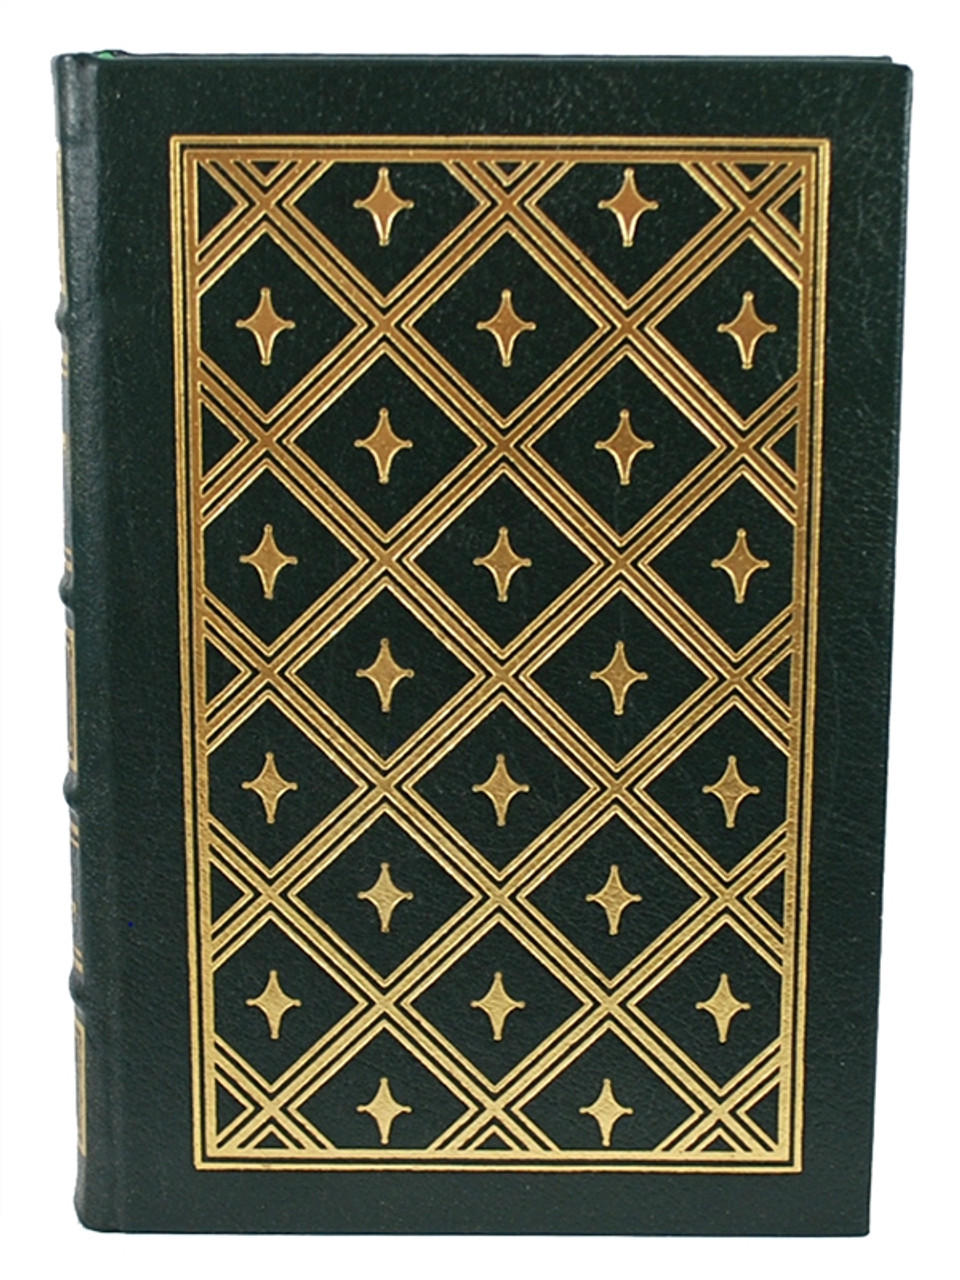 Easton Press, David M. Oshinsky "A Conspiracy So Immense" Leather Bound Collector's Edition